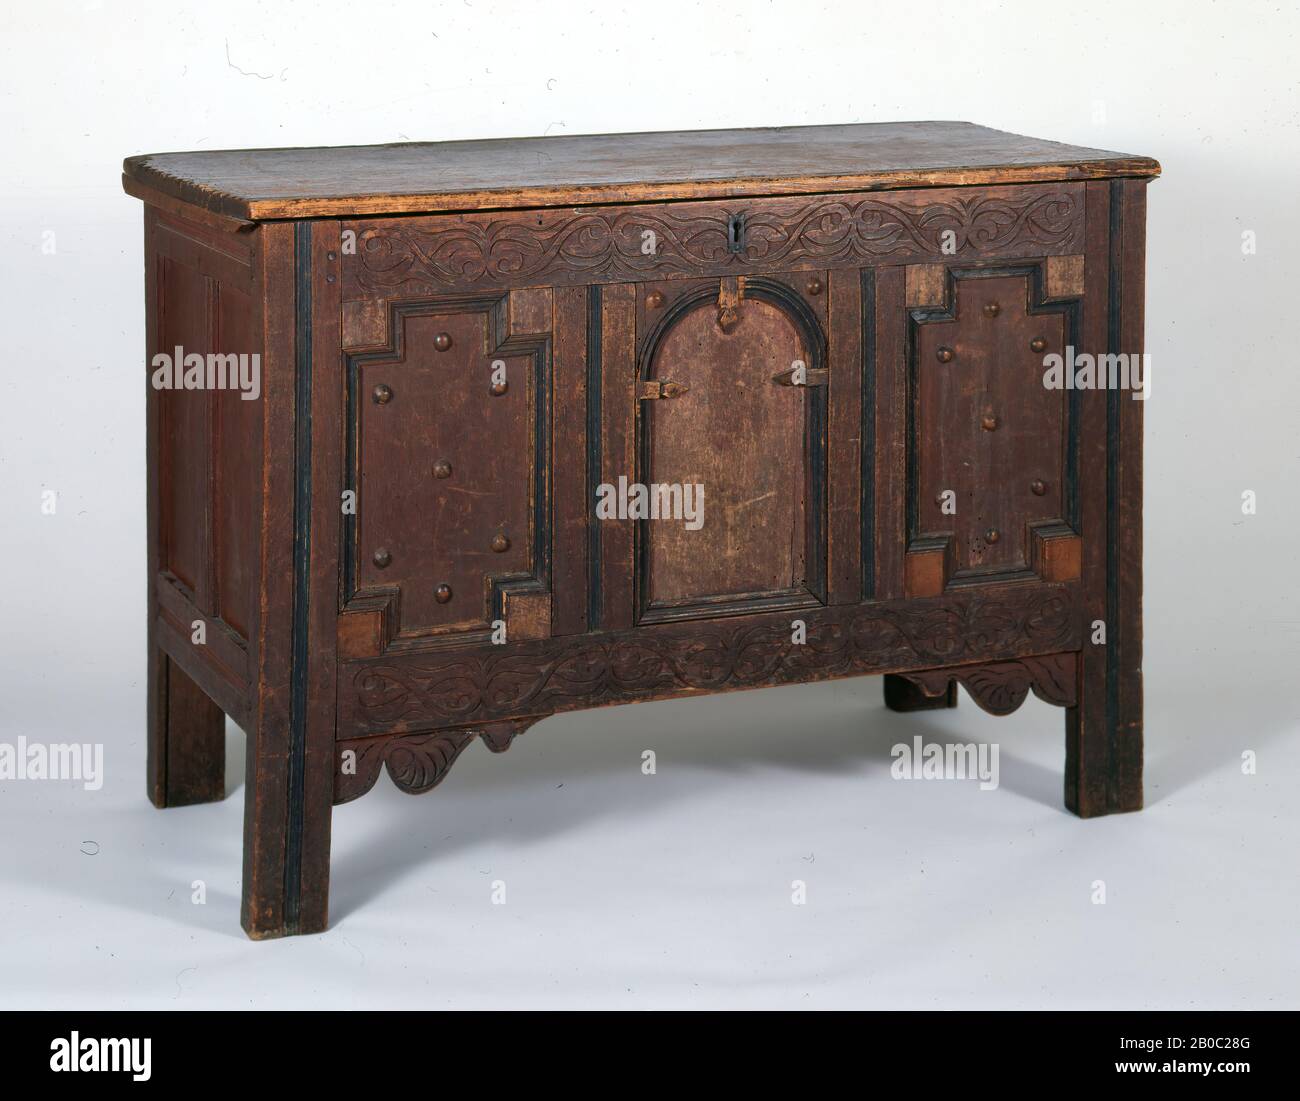 Thomas Dennis, Joined Chest, 1665-1700, oak, and pine, 31 3/4 in. x 41 3/8 in. x 19 15/16 in. (80.6 cm. x 105.1 cm. x 50.7 cm.) Stock Photo